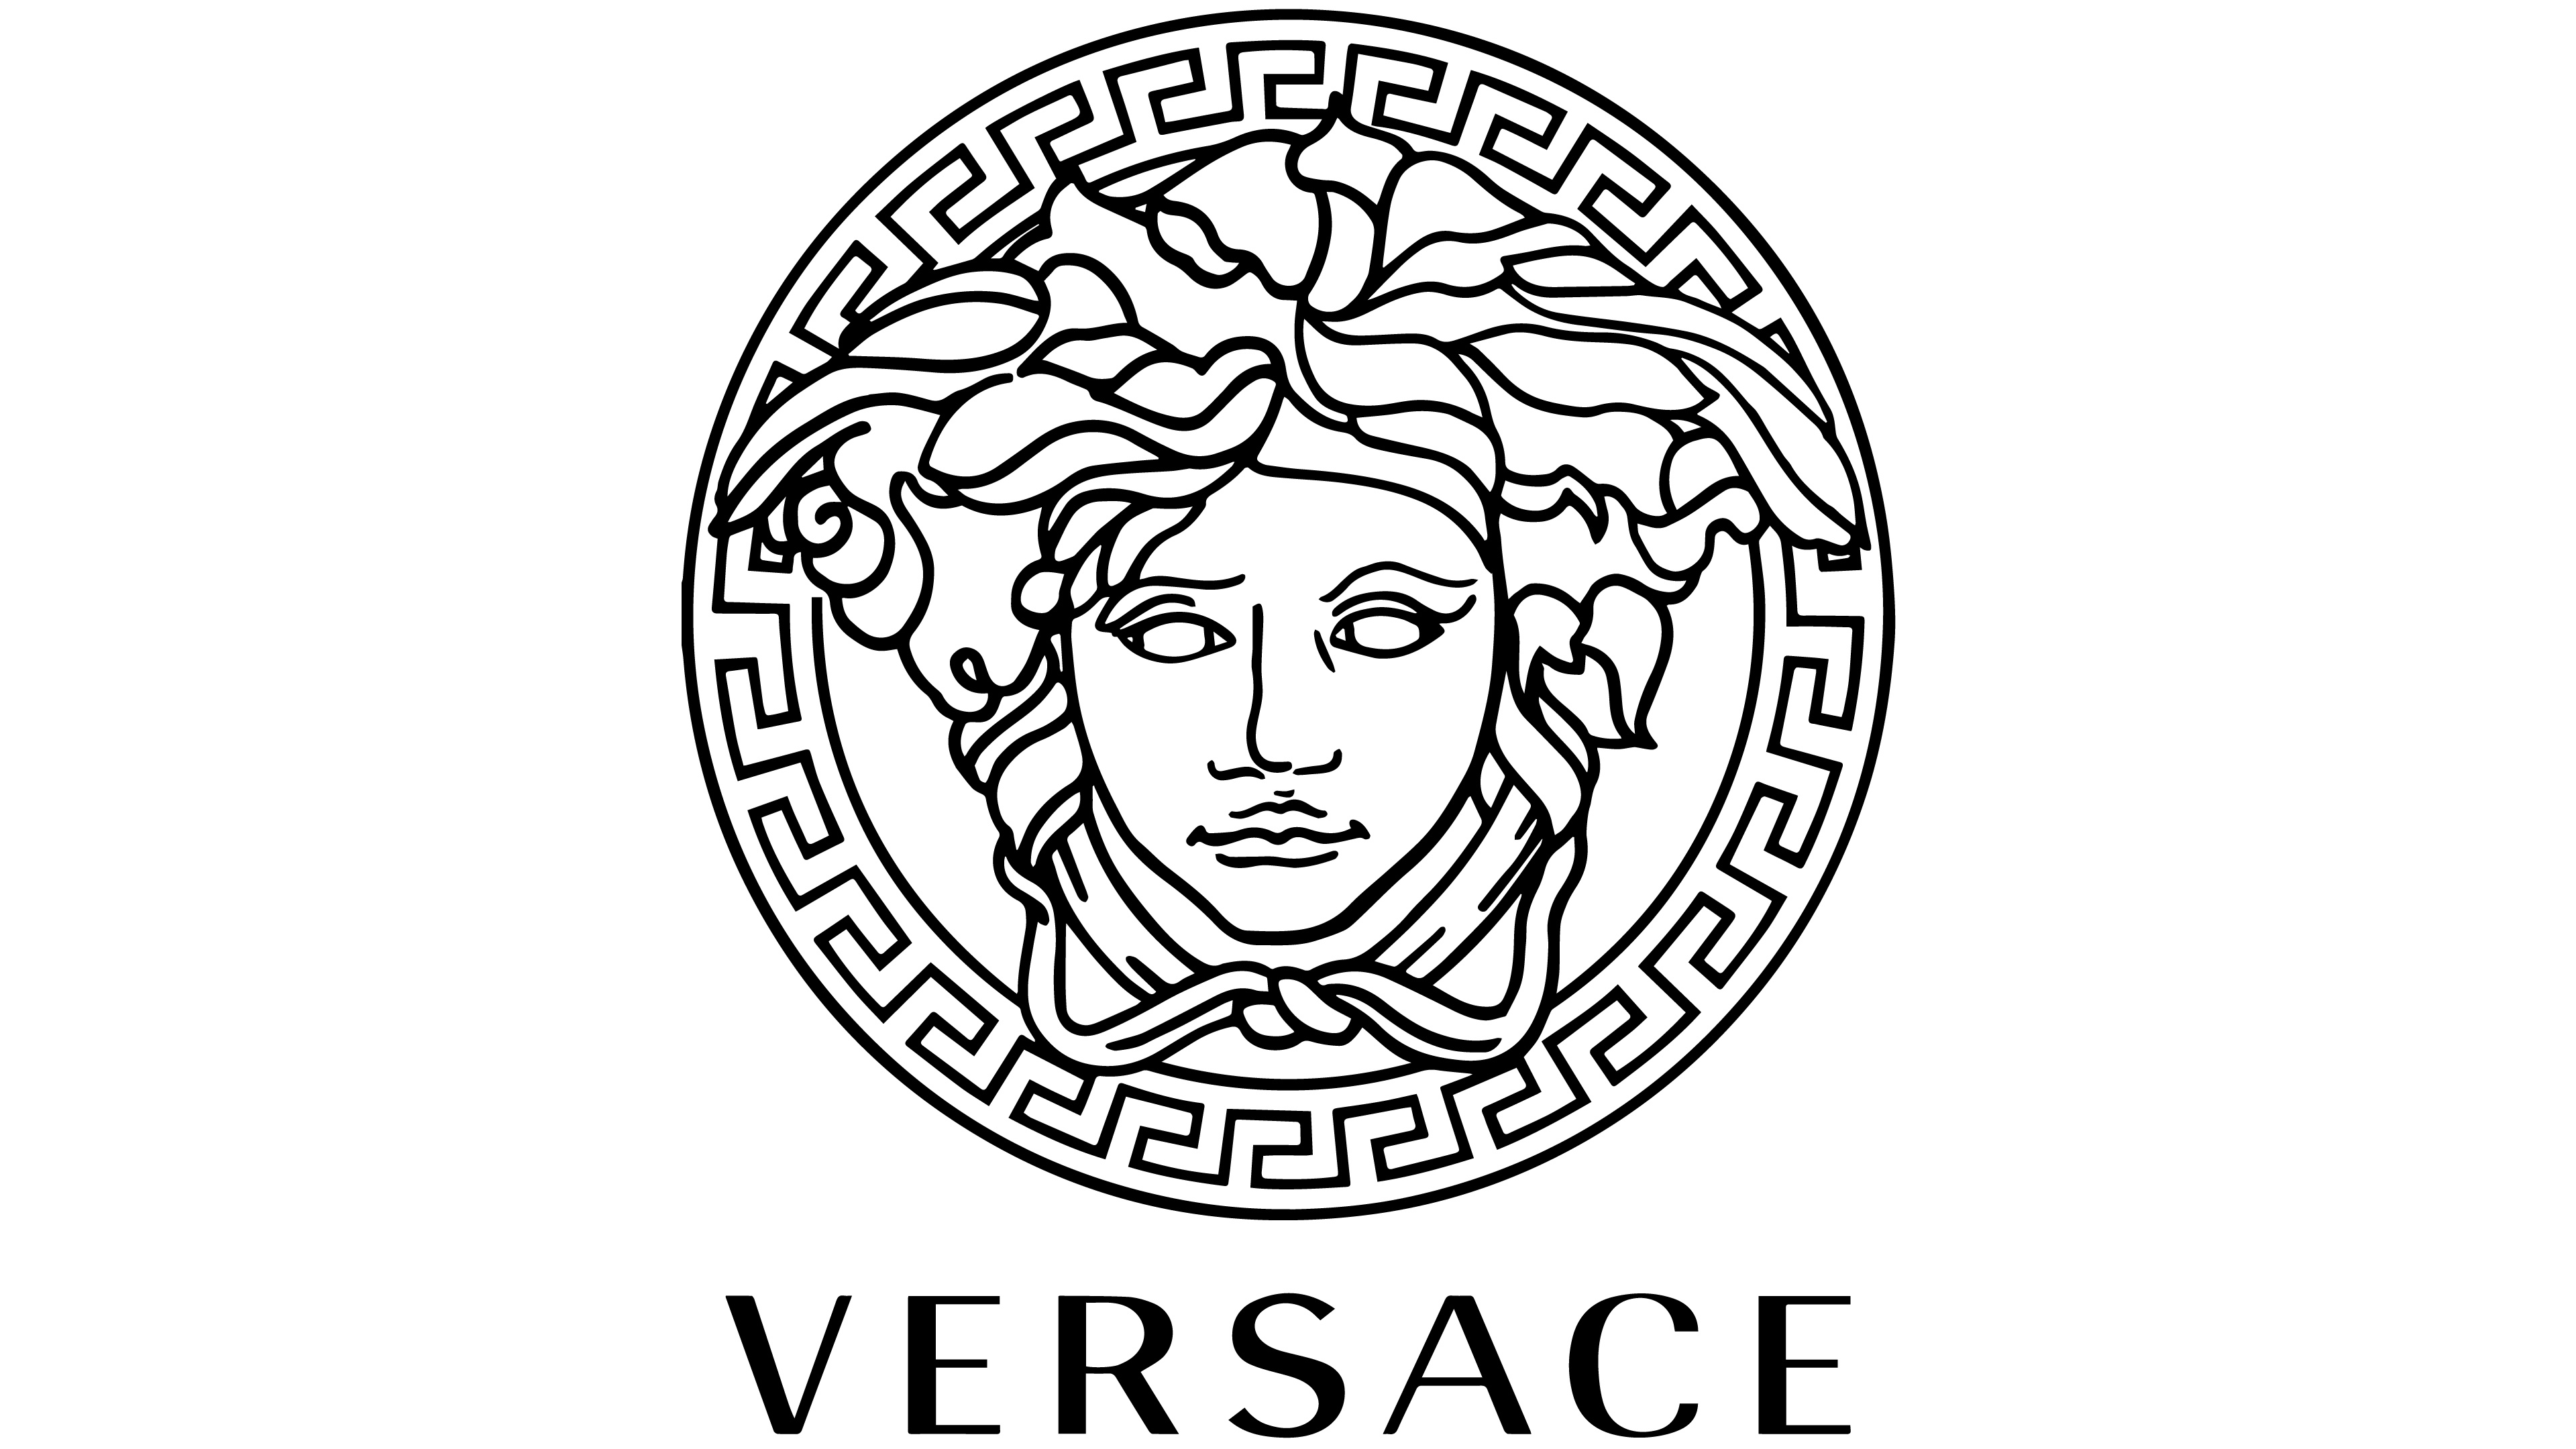 Versace: An Italian fashion company, Founded by Gianni Versace in 1978, Logo. 3840x2160 4K Background.